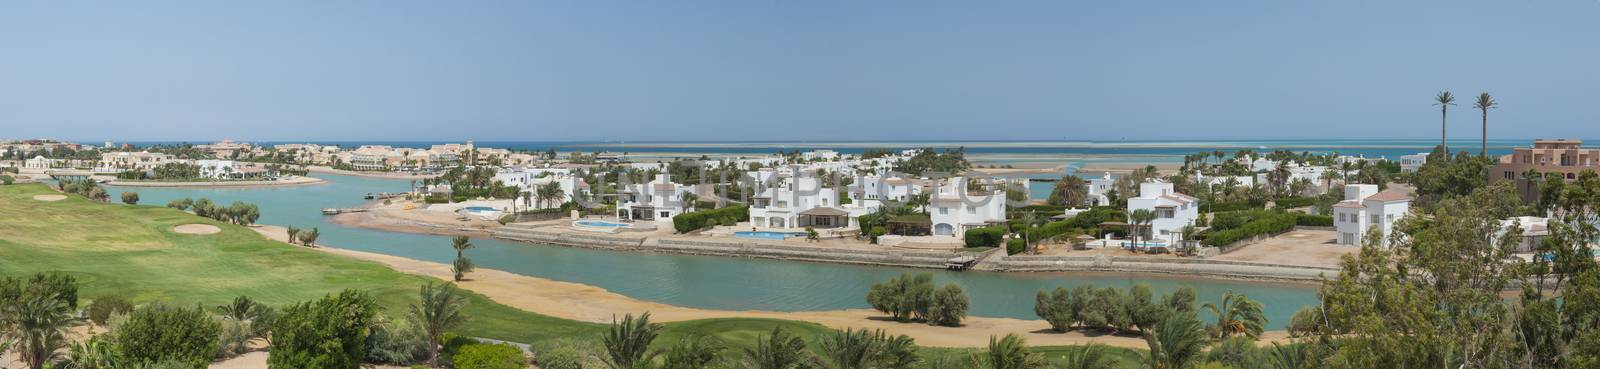 Panoramic aerial view over large coastal lagoon with luxury waterfront villa residences in tropical coastal resort town